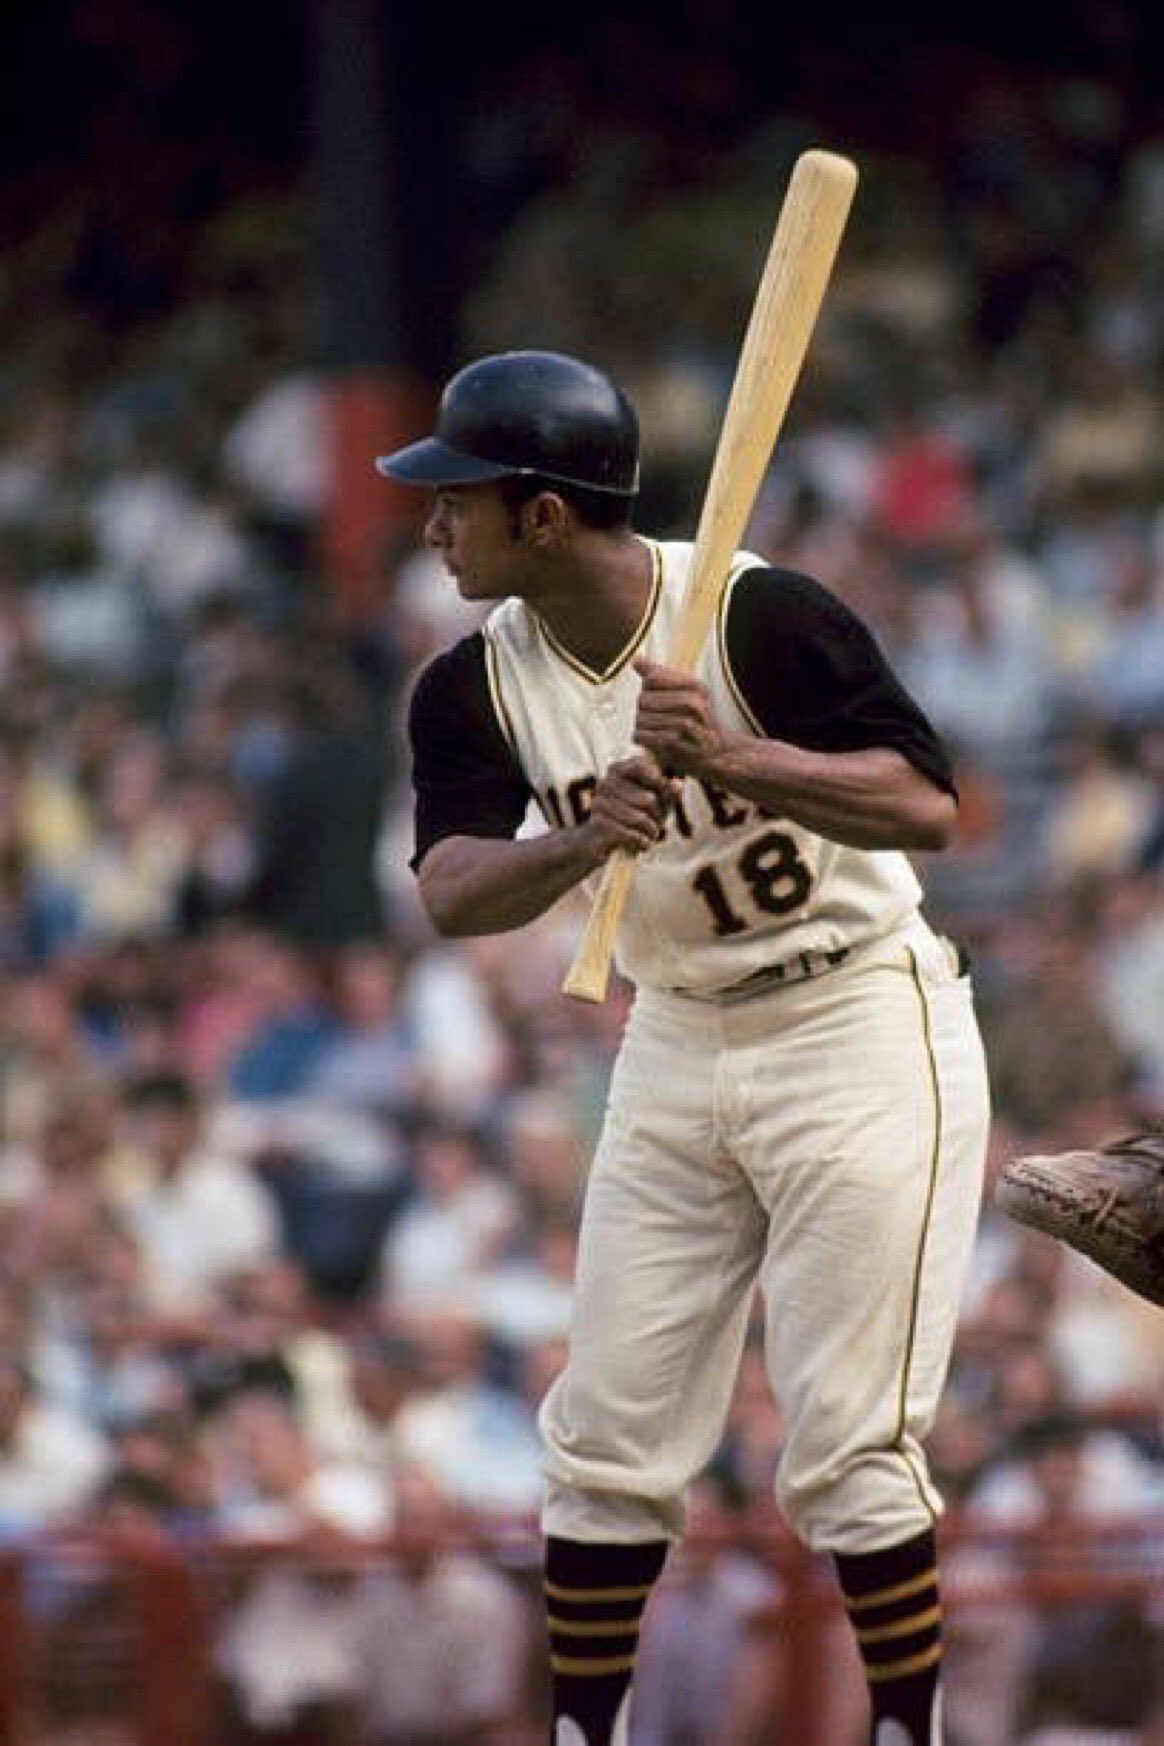 helt bestemt Cape Spiller skak Tom's Old Days on Twitter: "“Old Days”One of the best contact Hitters in  the 1960's and early 70's,Matty Alou,bats during a 1969 game at Forbes  Field.##Pirates #Pittsburgh #1960s #MLB https://t.co/gvA8oDpLLq" / Twitter